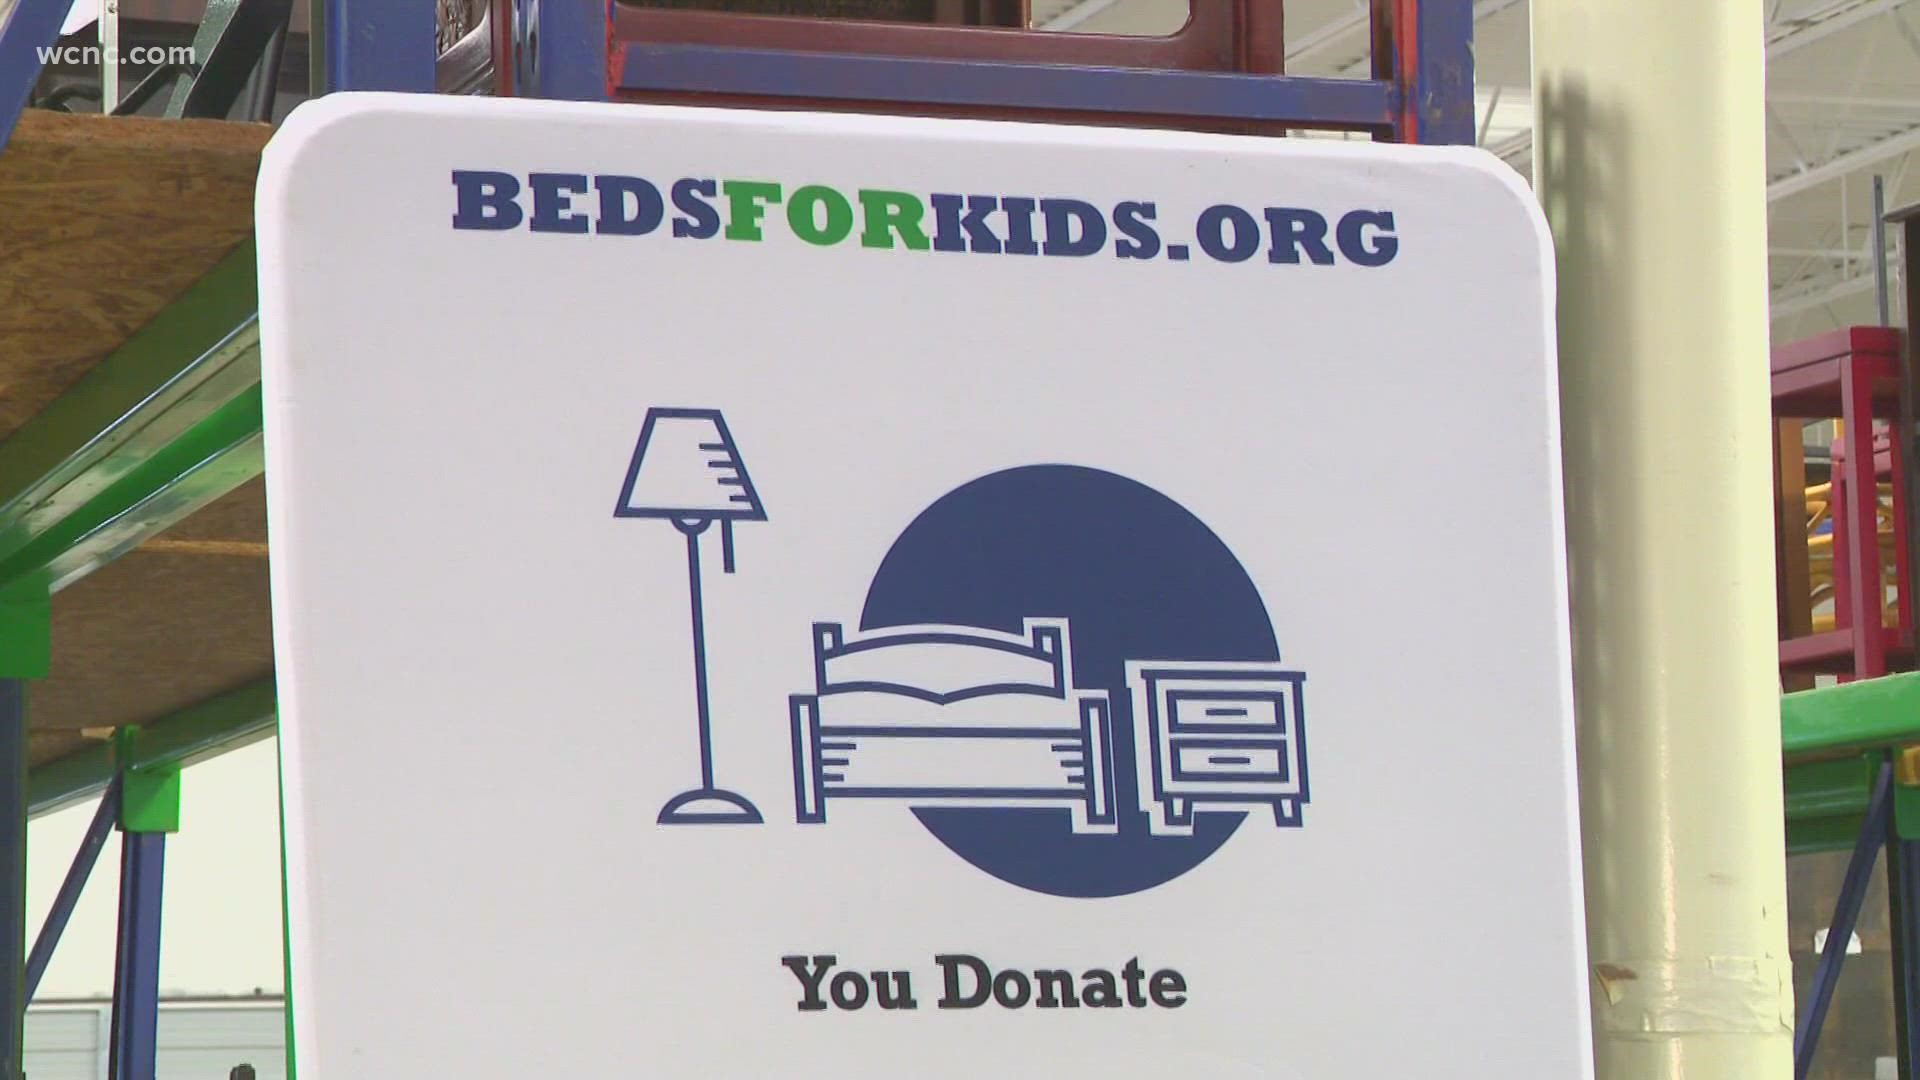 Beds for Kids' mission is to provide a bed and other essential furniture to every family in need in the Queen City.